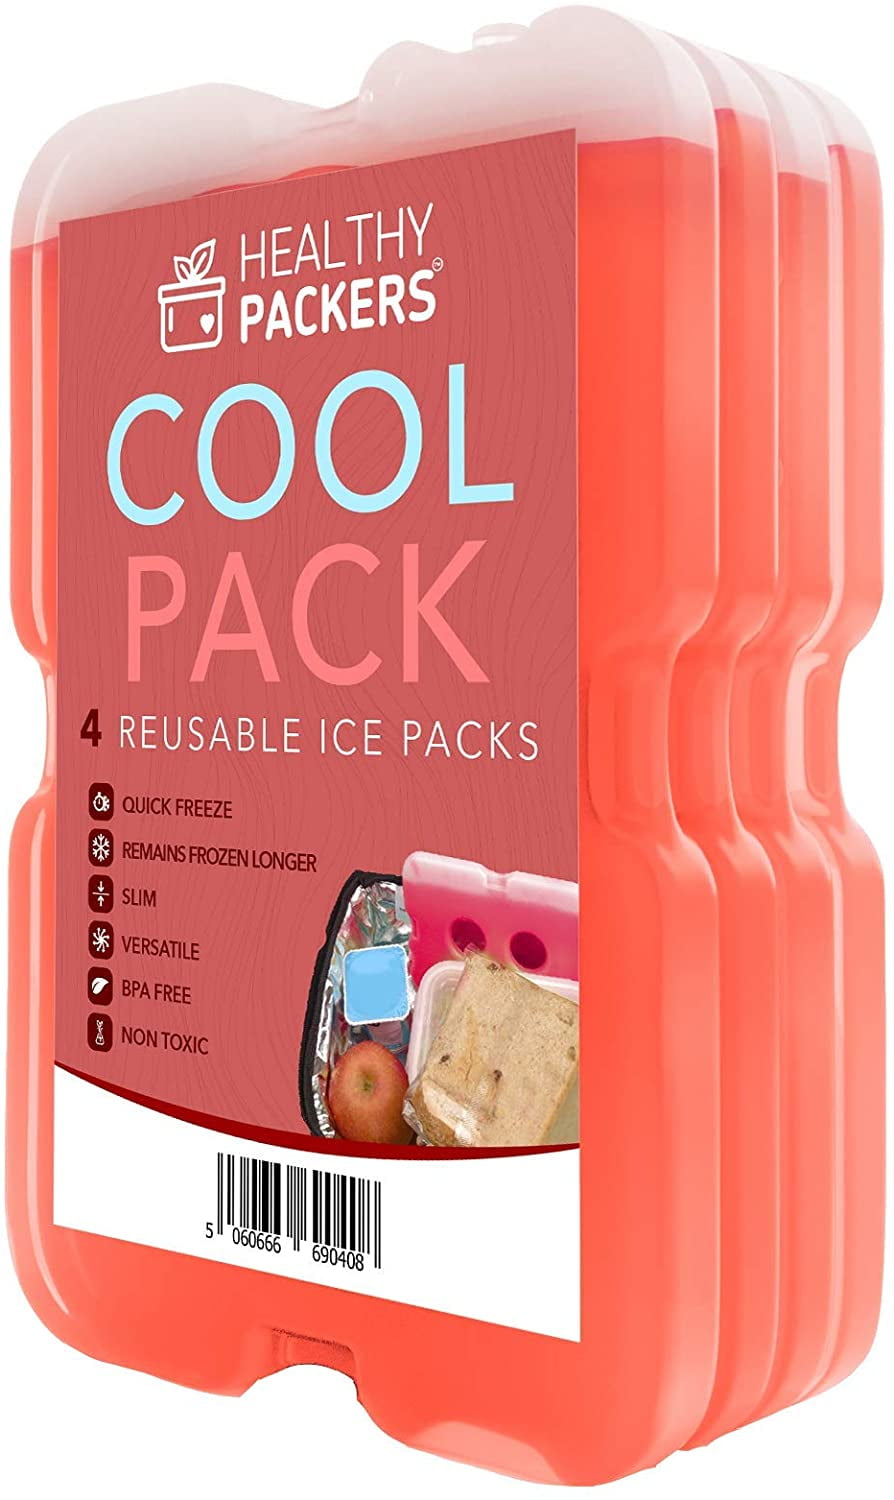 4x Reusable Slim Ice Packs for Lunch Boxes Coolers Freezer Chillers Food Storage 